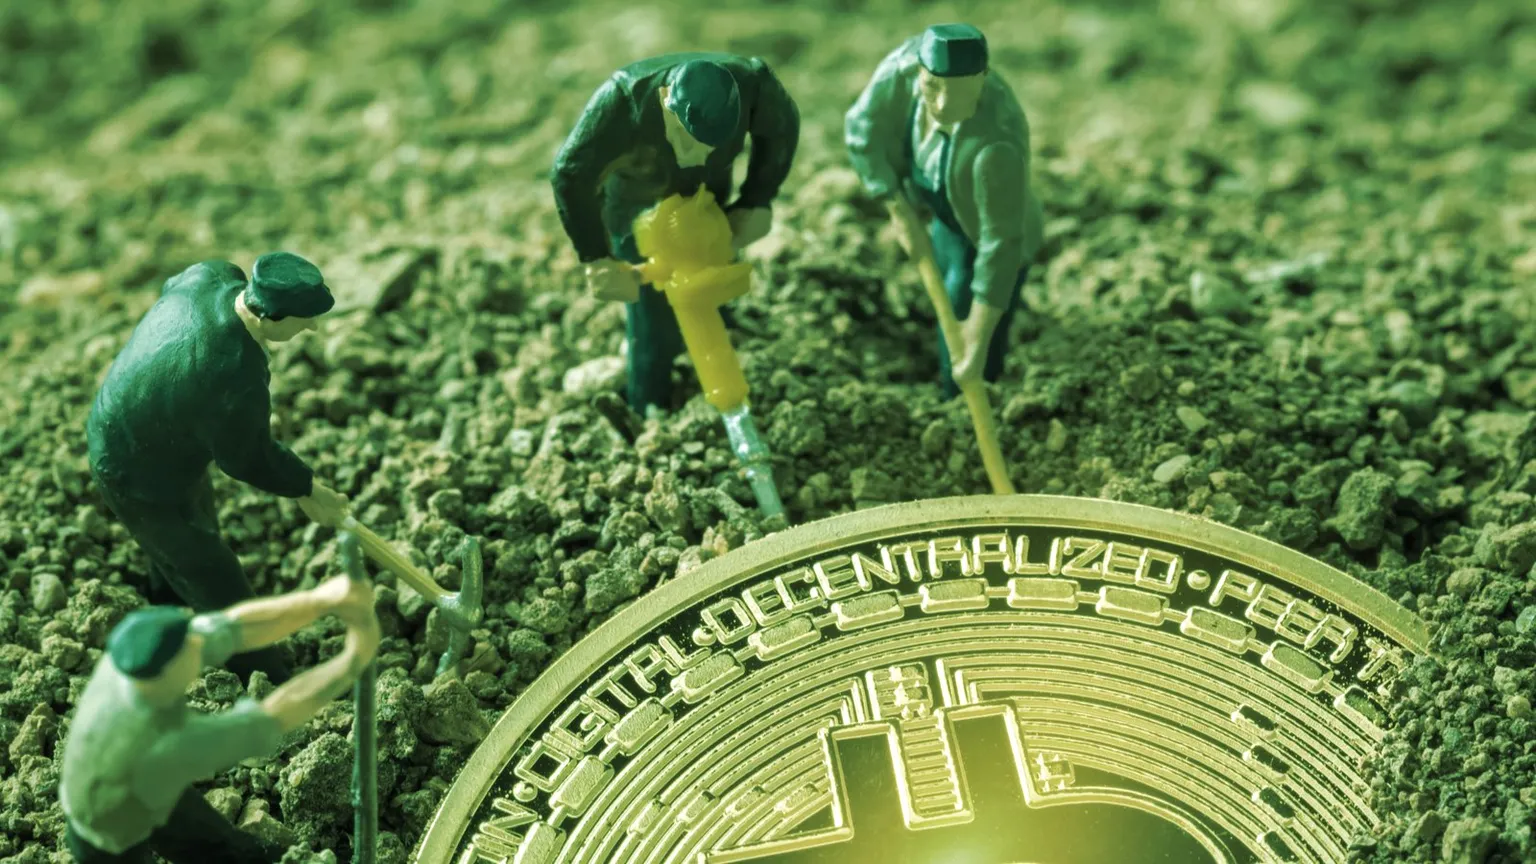 Bitcoin "mining" refers to the activity of generating new BTC. Image: Shutterstock